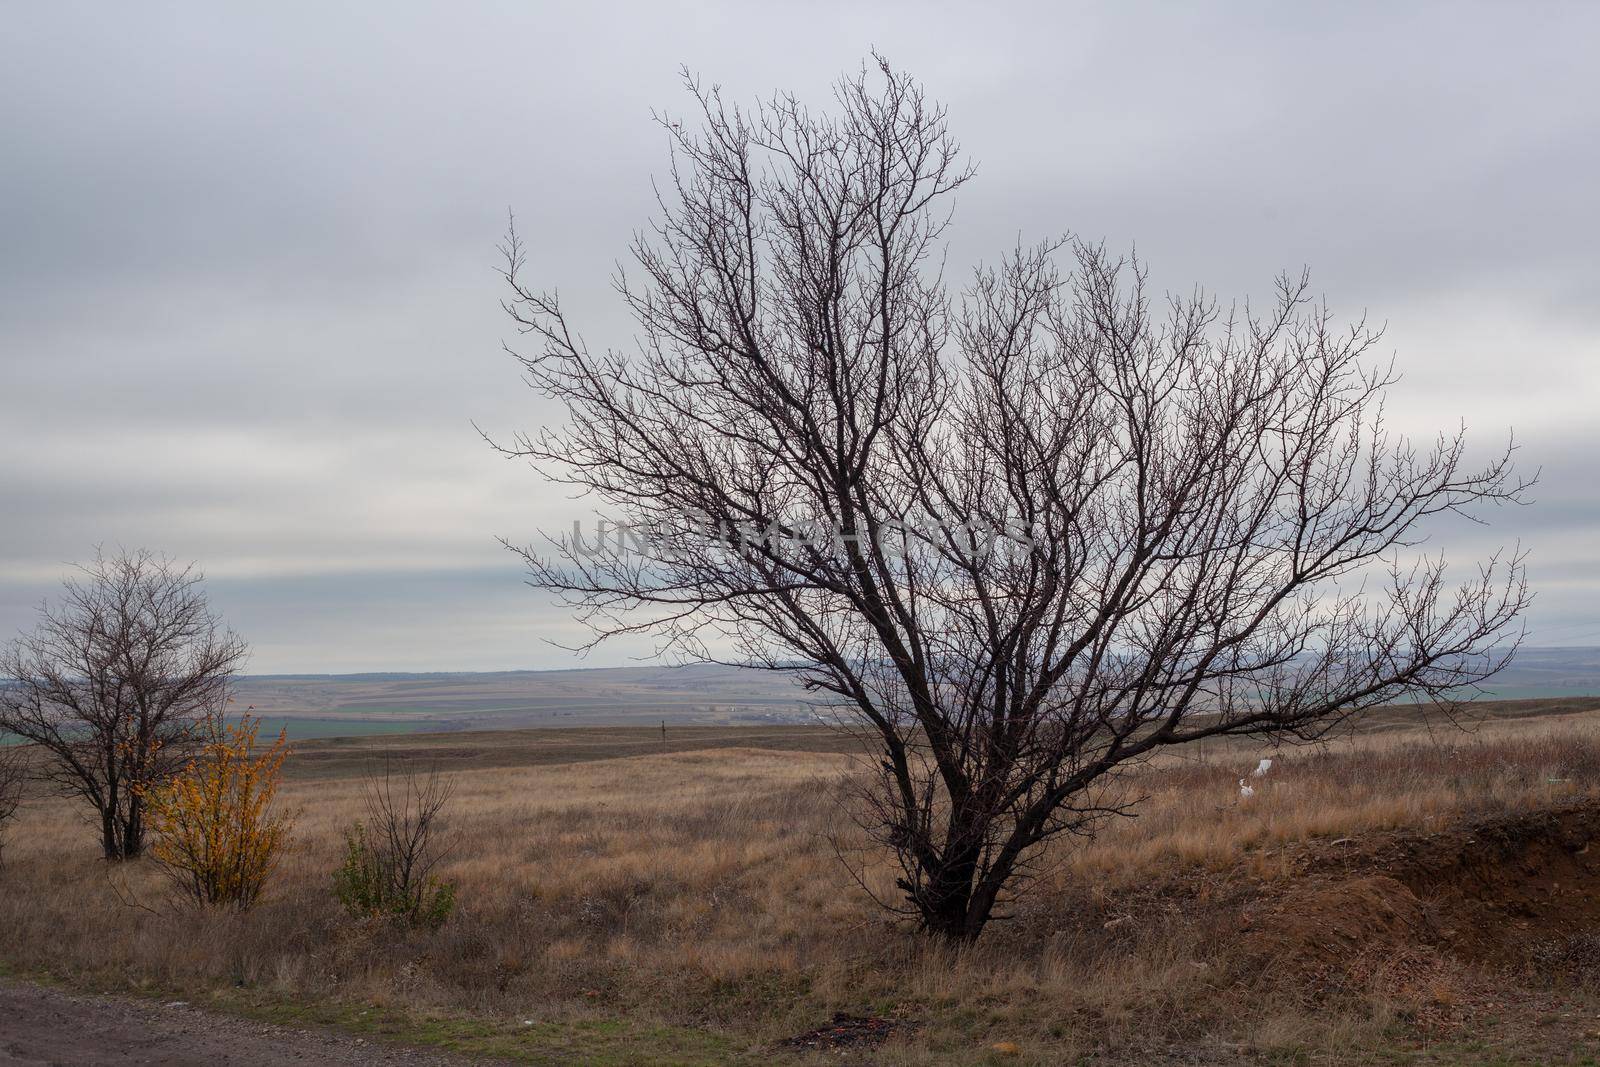 Autumn lanscape in the steppes with tree by Angorius